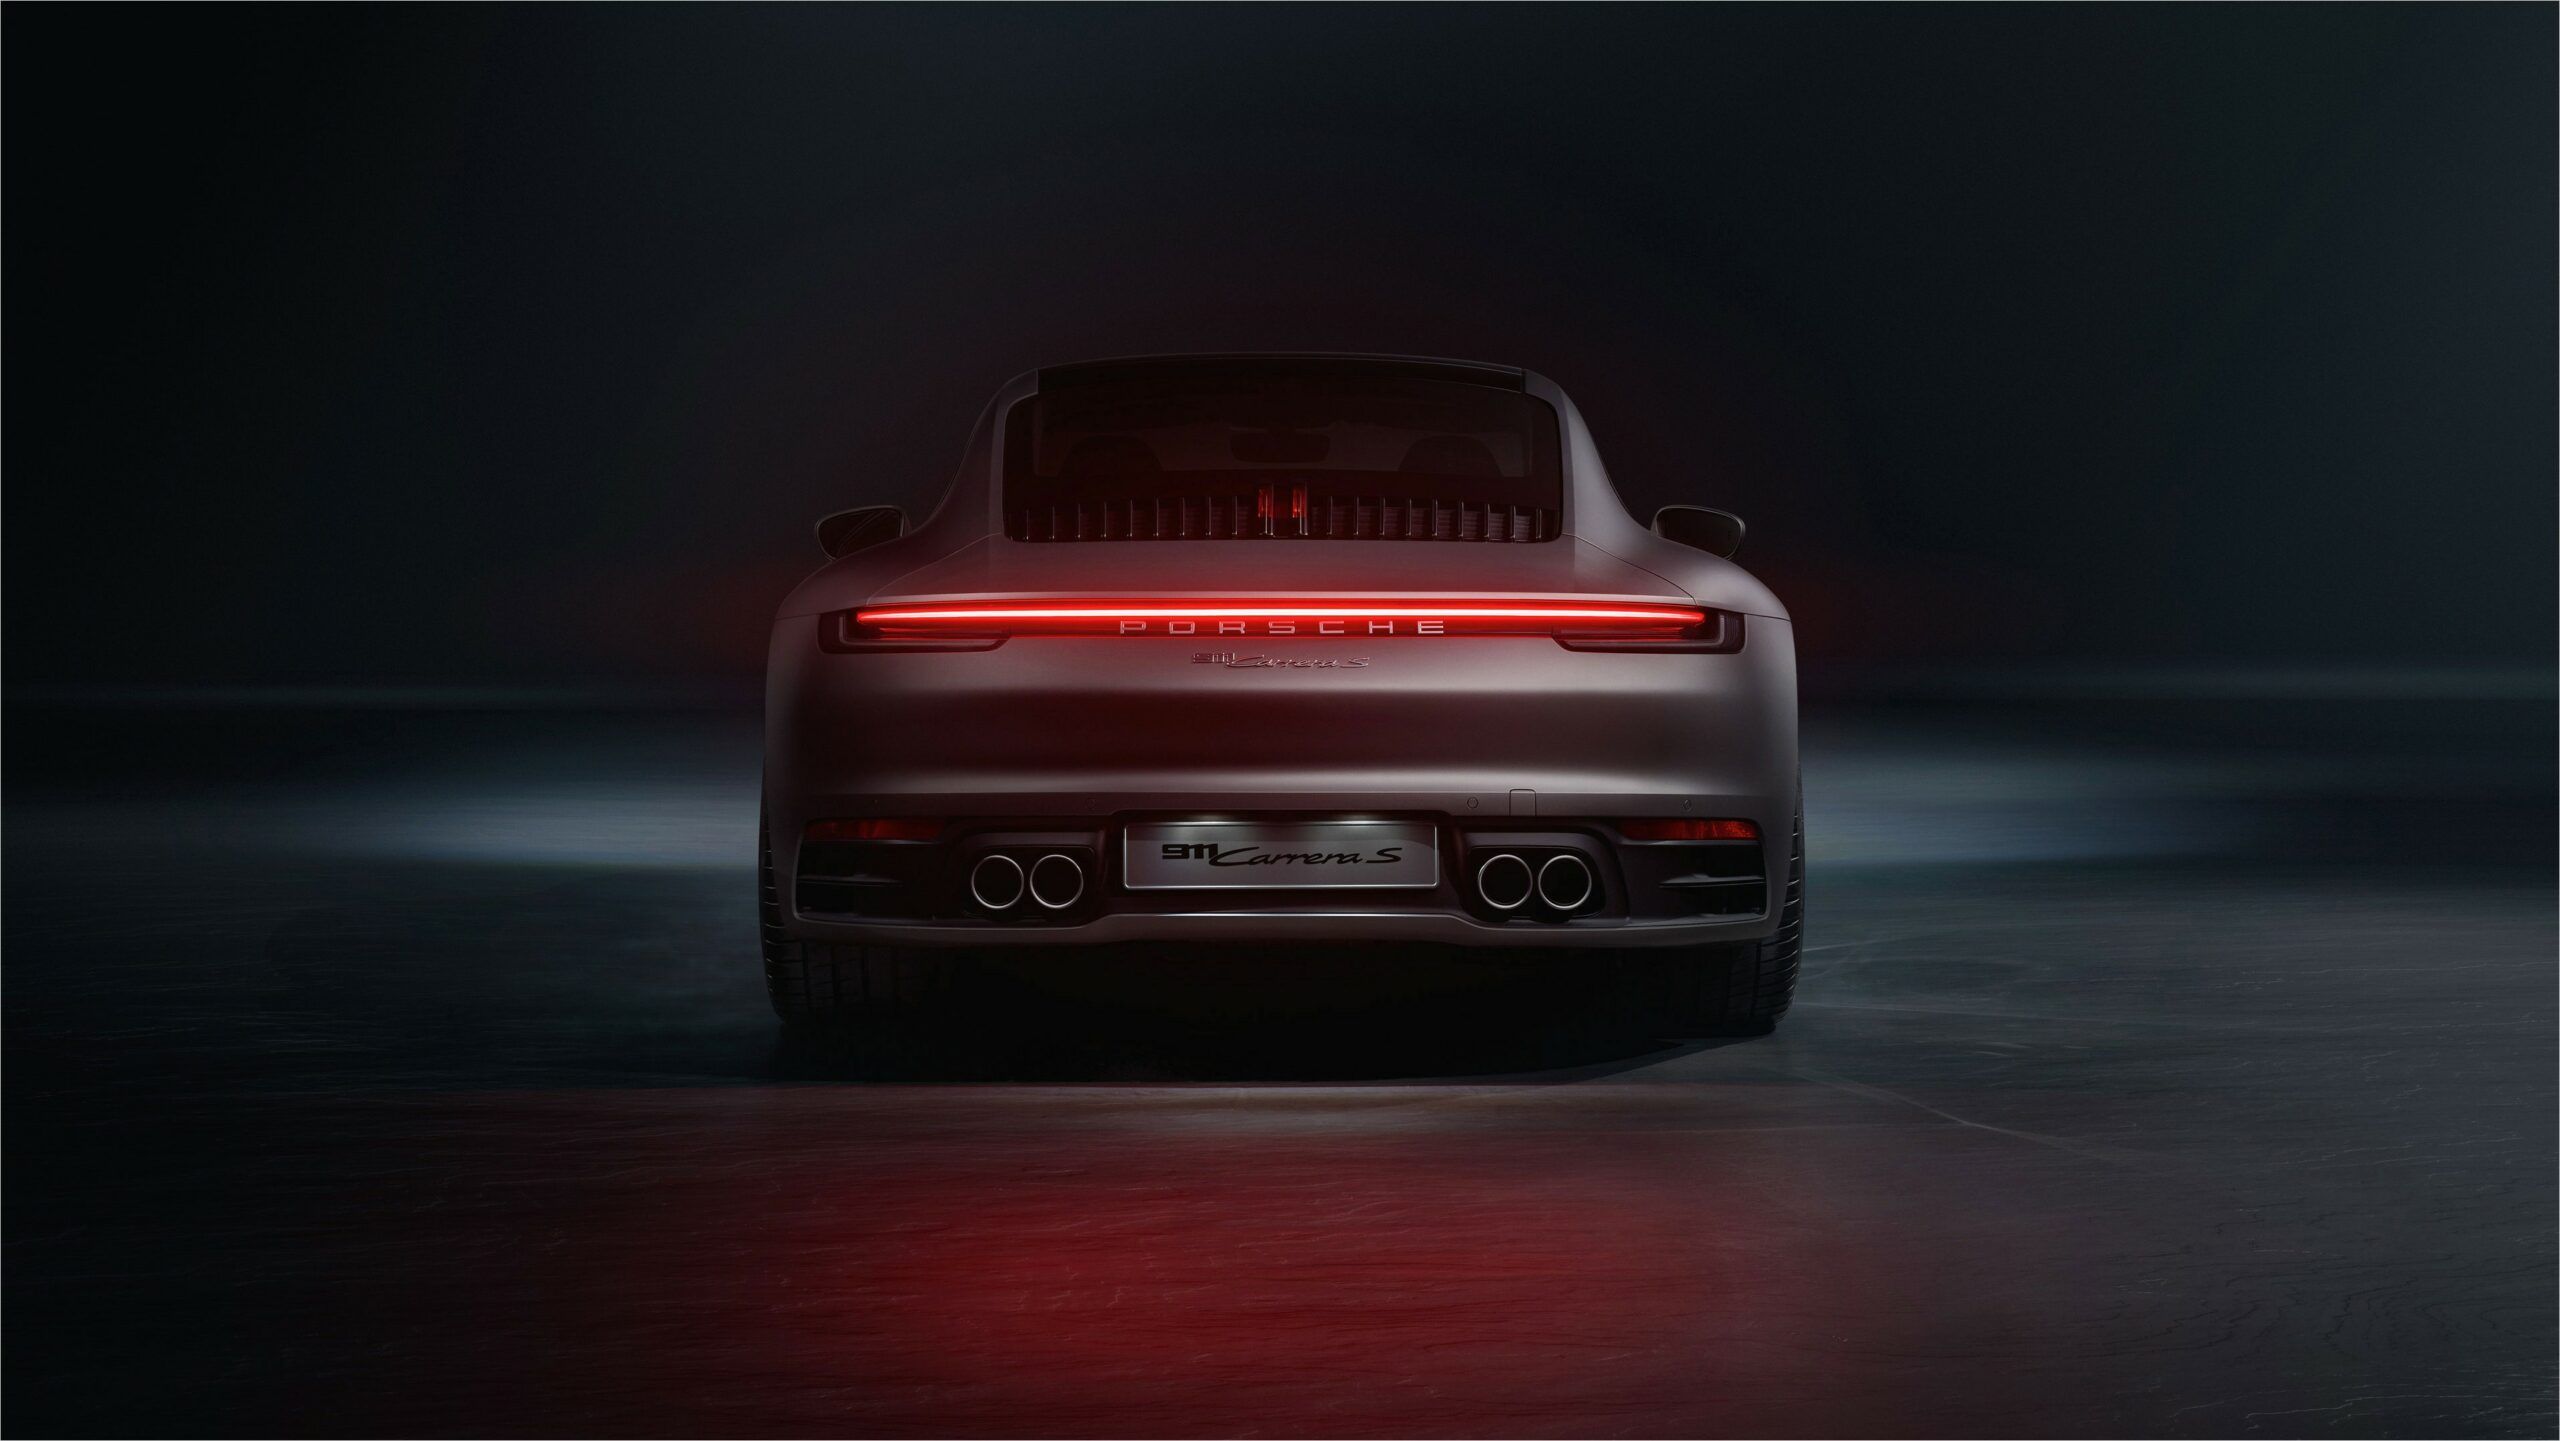 4k HDr Wallpaper Porsche Lights In With Image